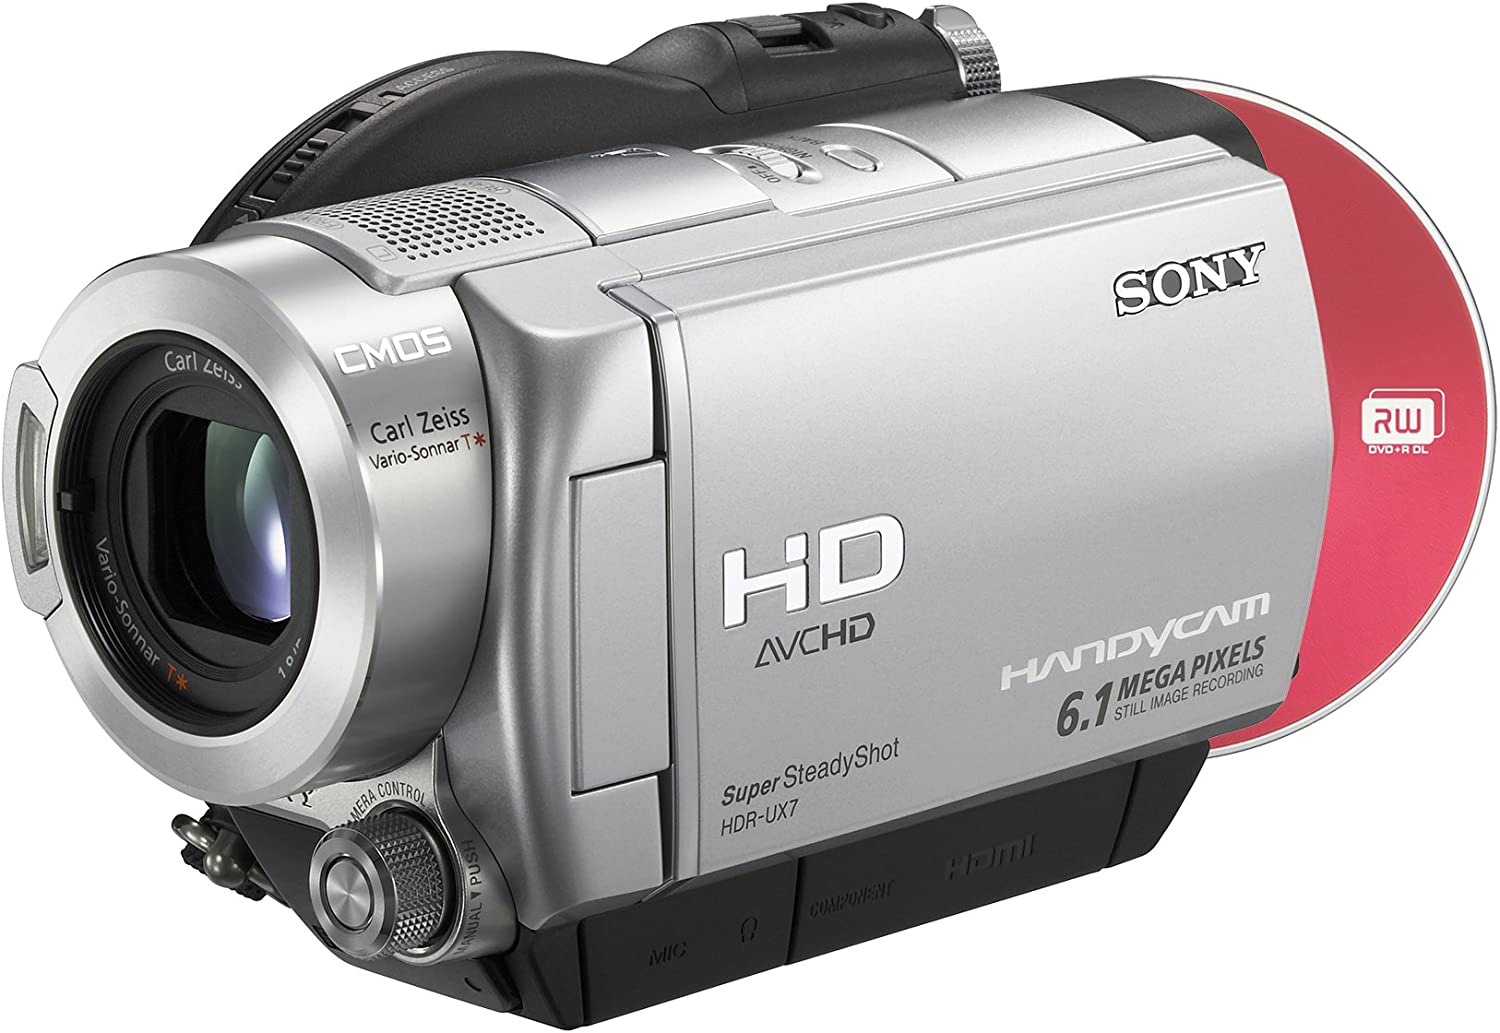 Sony HDR-UX7E